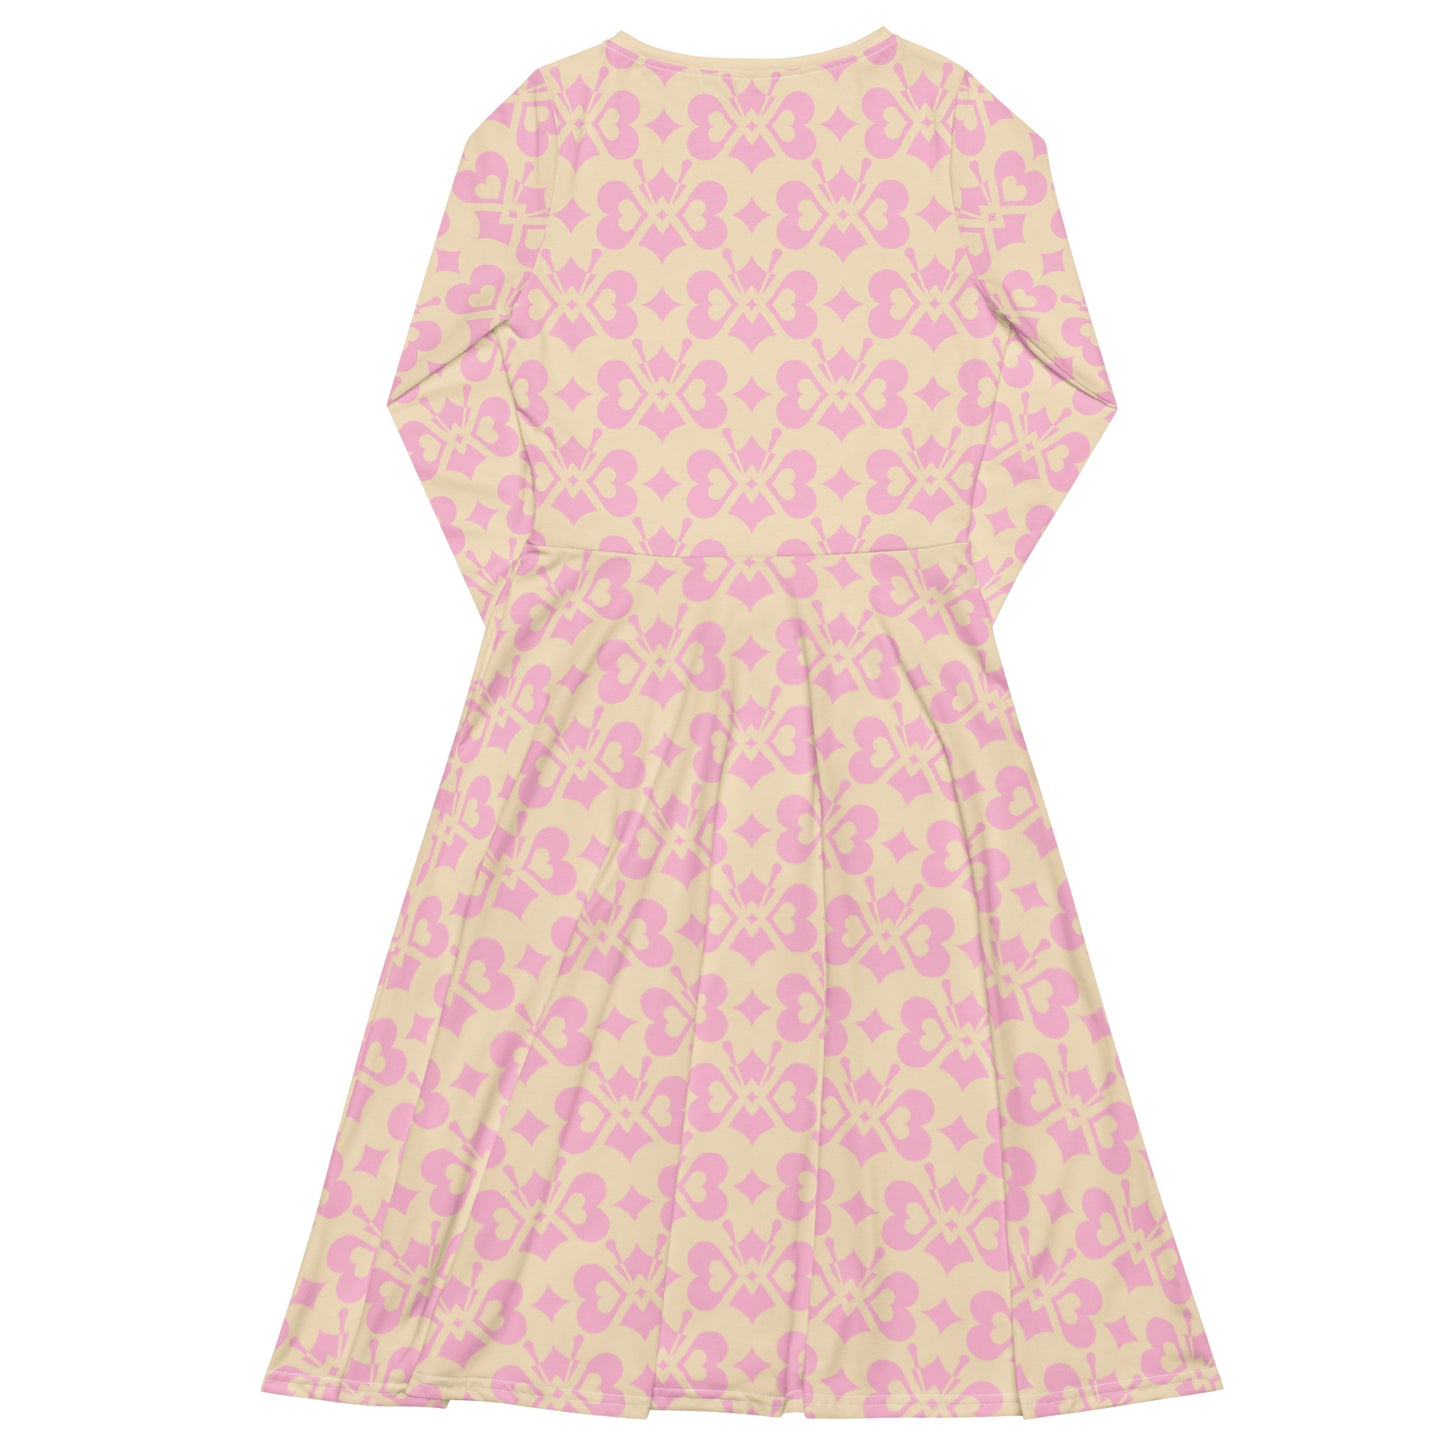 LOVE BUTTERFLY tender pink - Midi dress with long sleeves and handy pockets